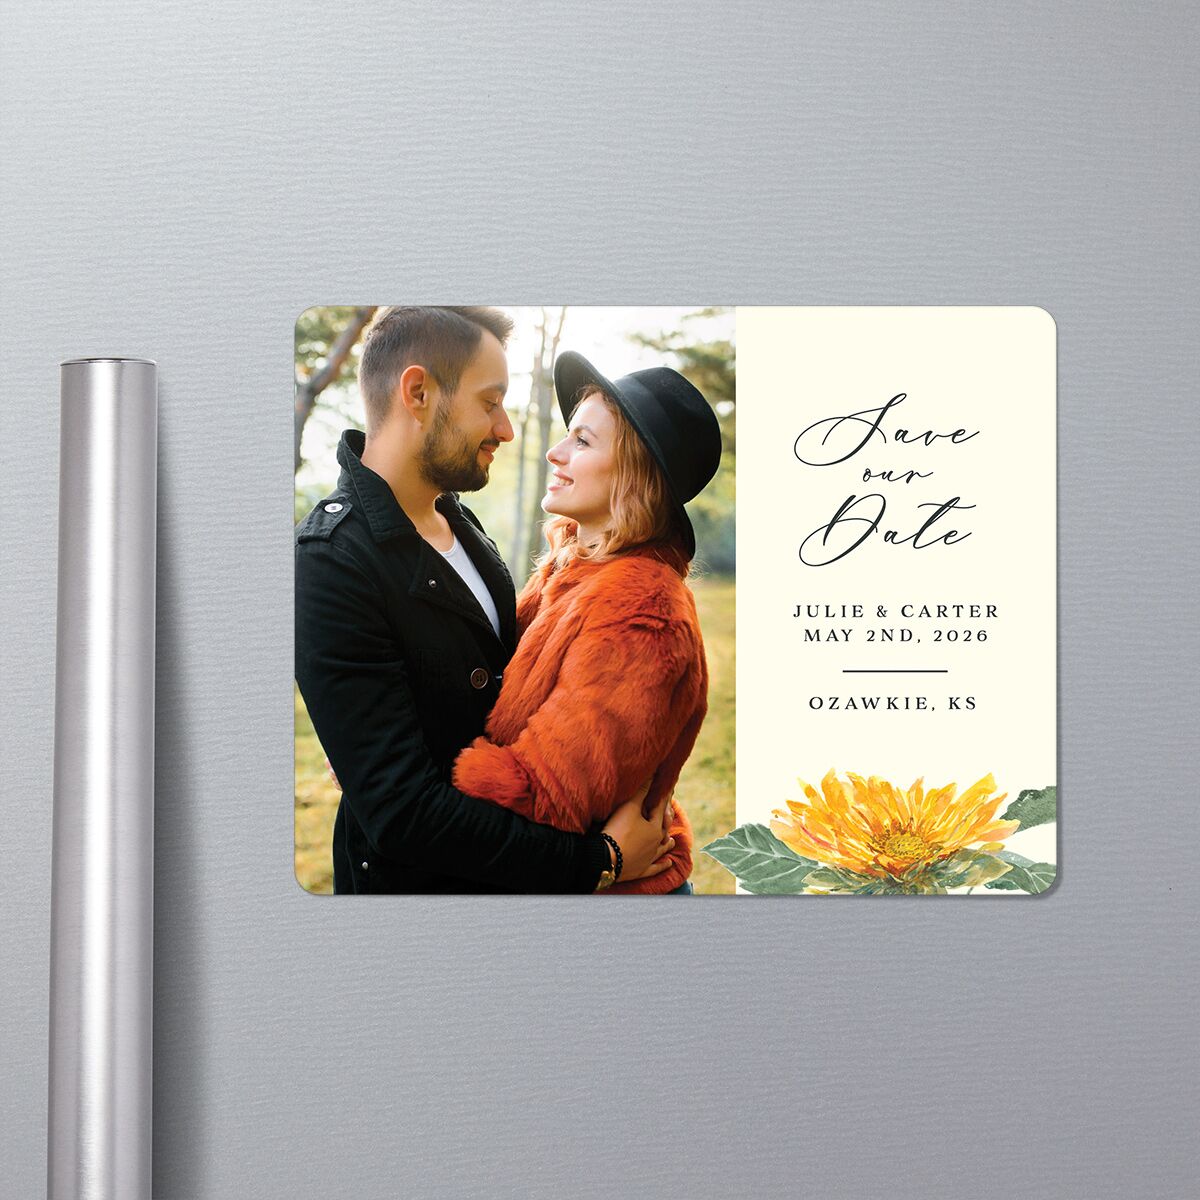 Sunflower Save The Date Magnets in-situ in Yellow